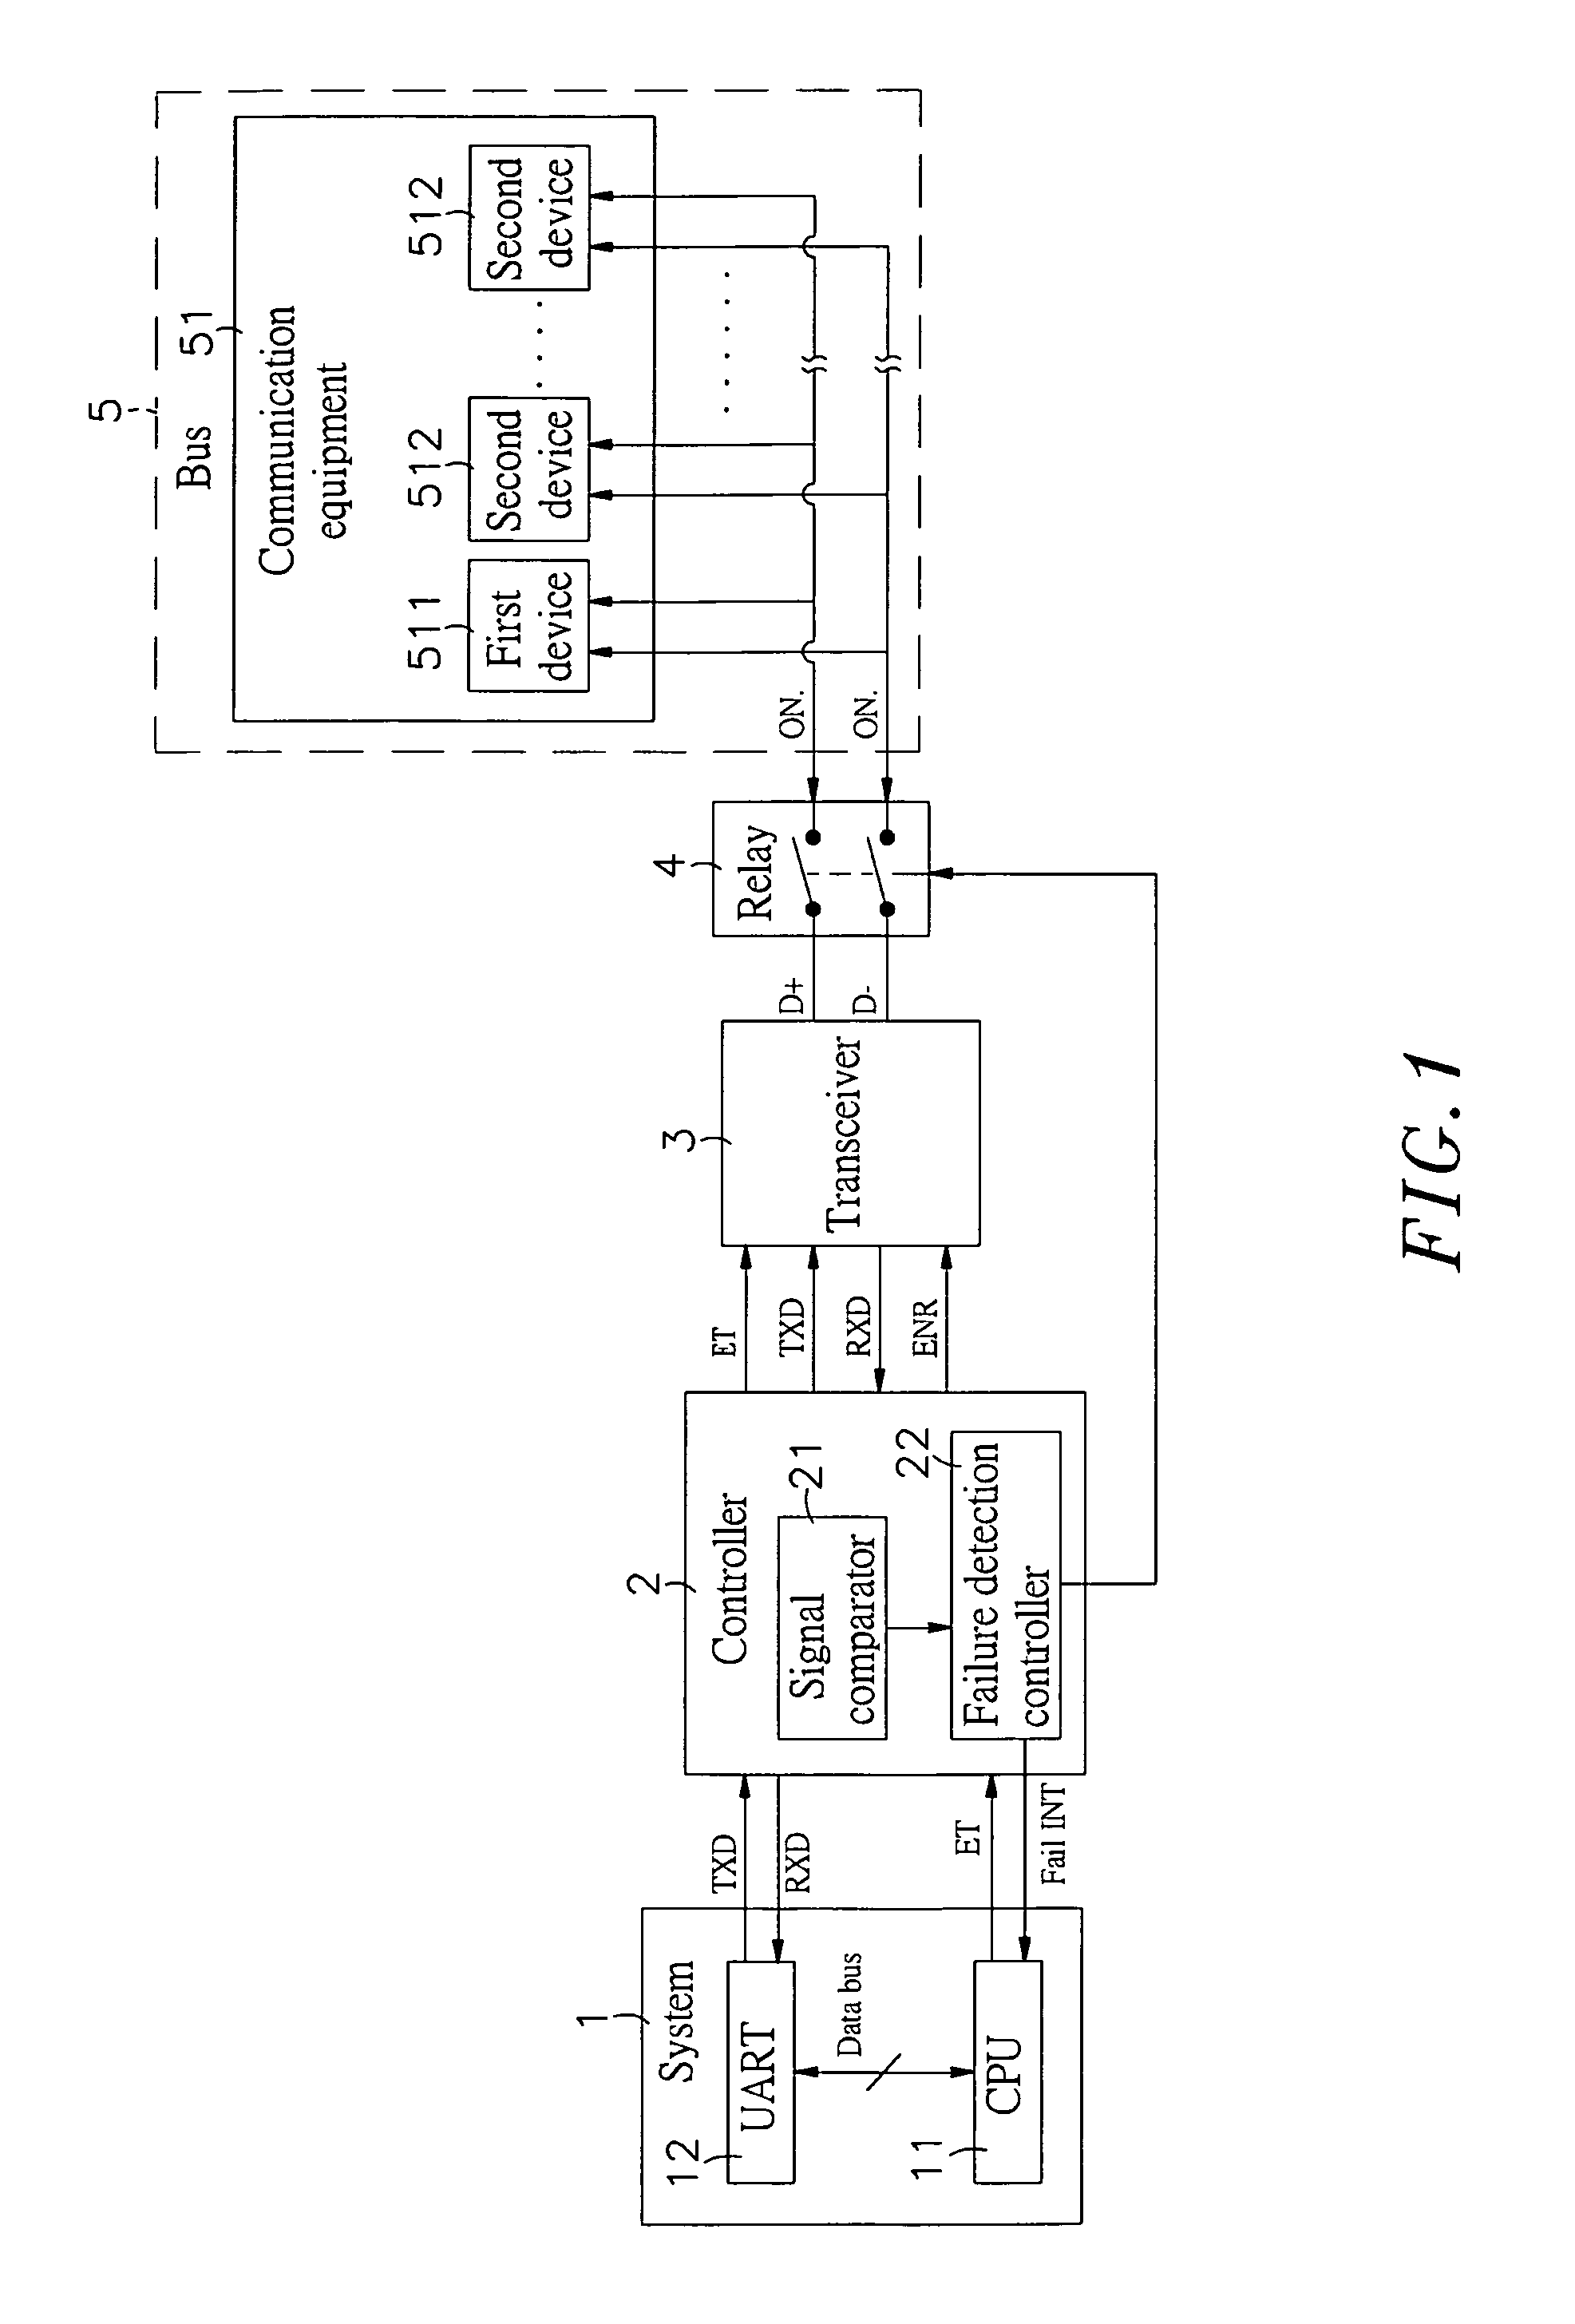 Method for disconnecting a transceiver from a bus in multipoint/multidrop architecture